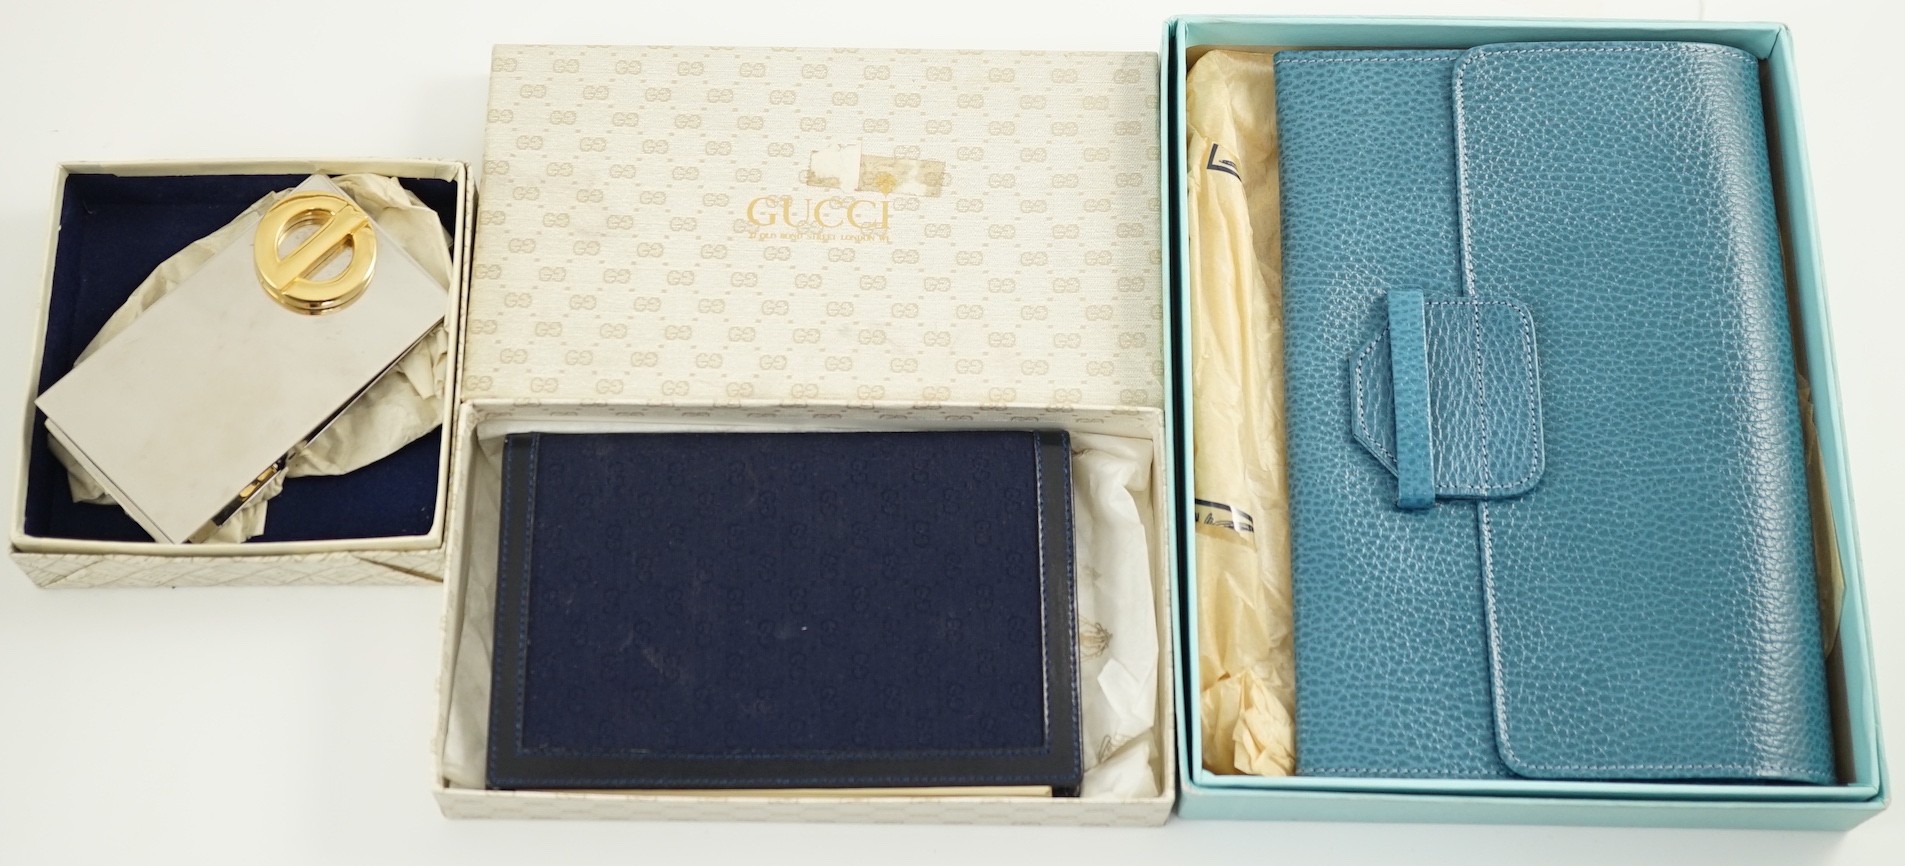 A Gucci blue leather address book, a Smythson leather travel wallet and a Christian Dior desk clip, all boxed.